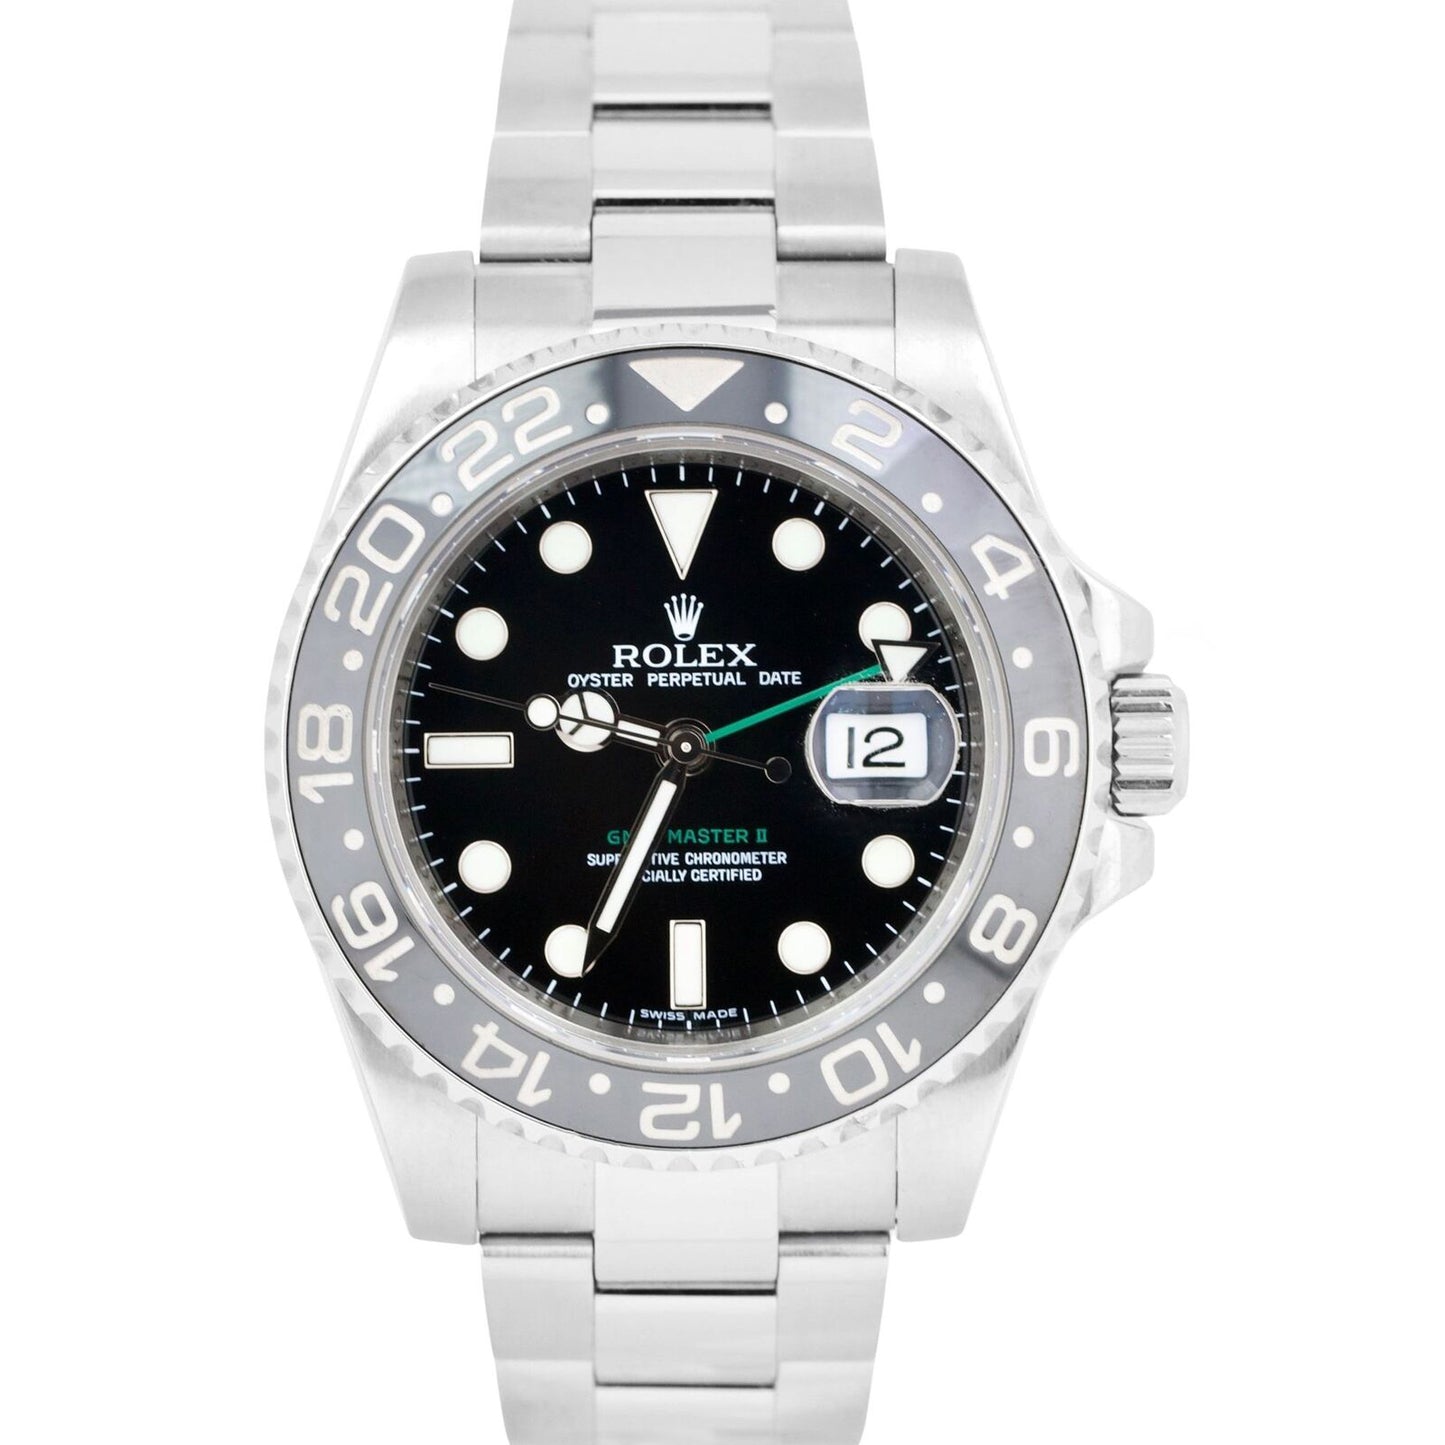 Rolex GMT-Master II Black 40mm Ceramic Stainless Steel Automatic Watch 116710 LN